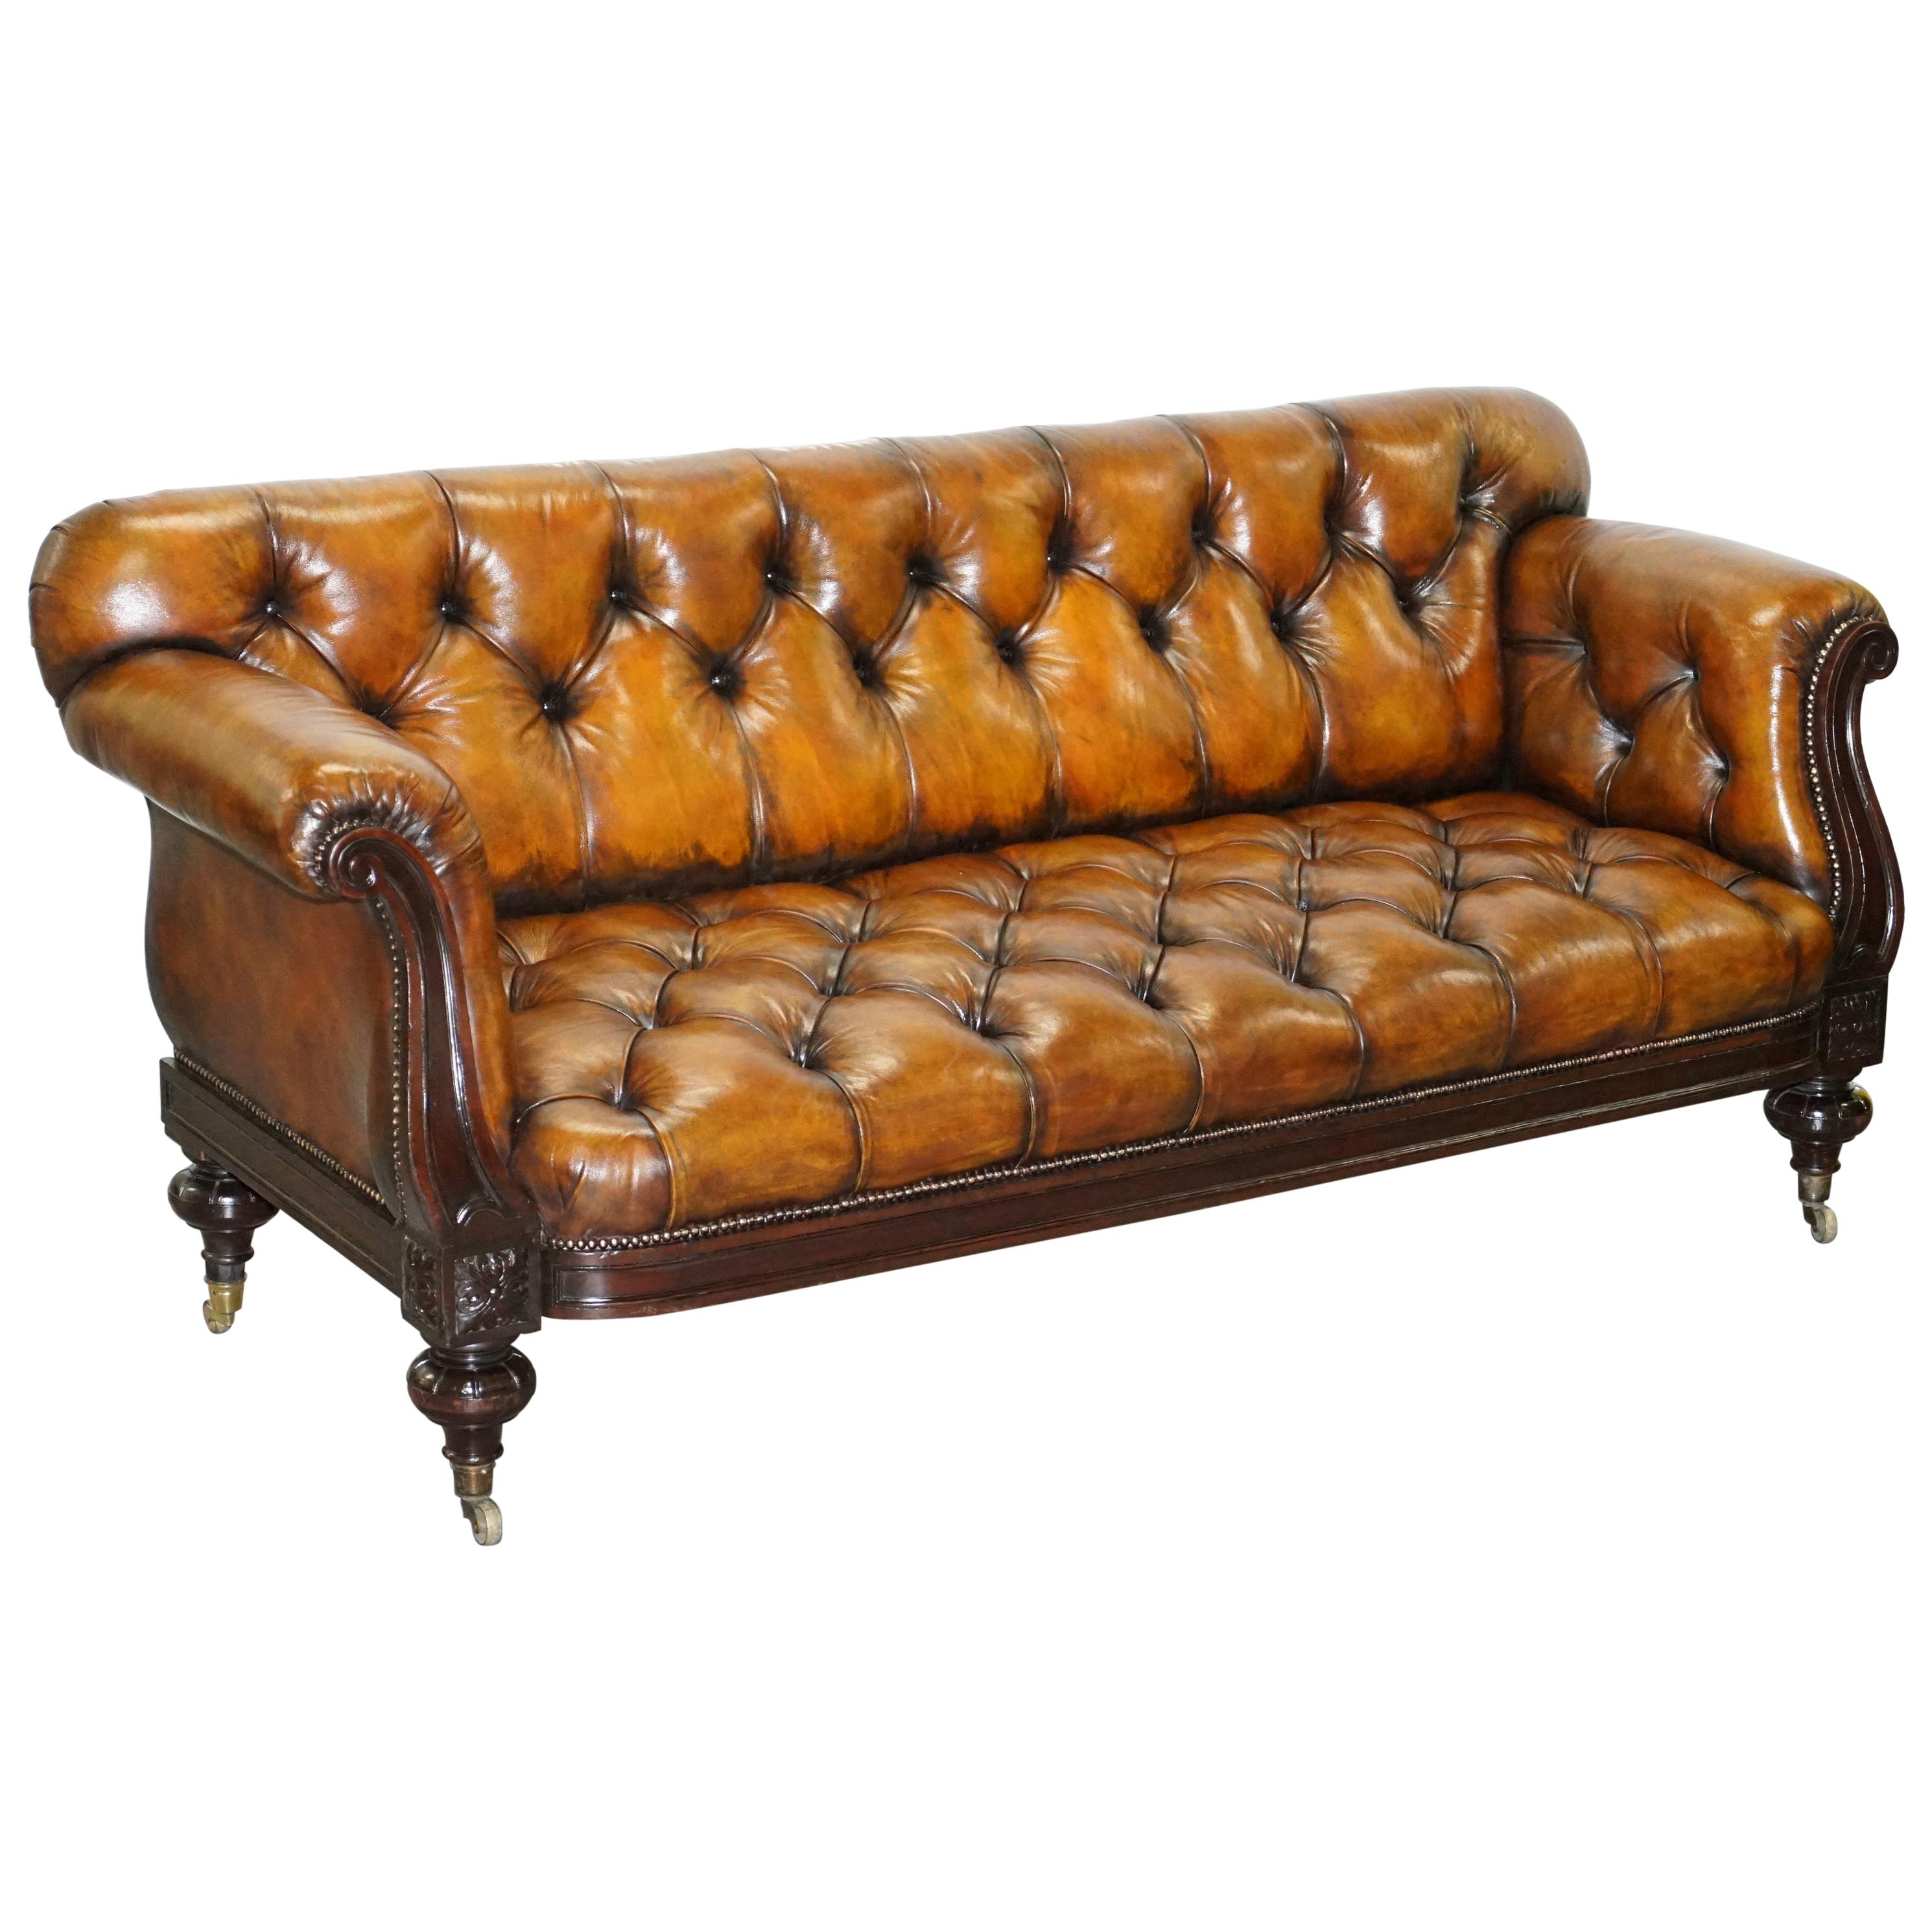 Fully Restored Show Frame Victorian Redwood Chesterfield Brown Leather Sofa